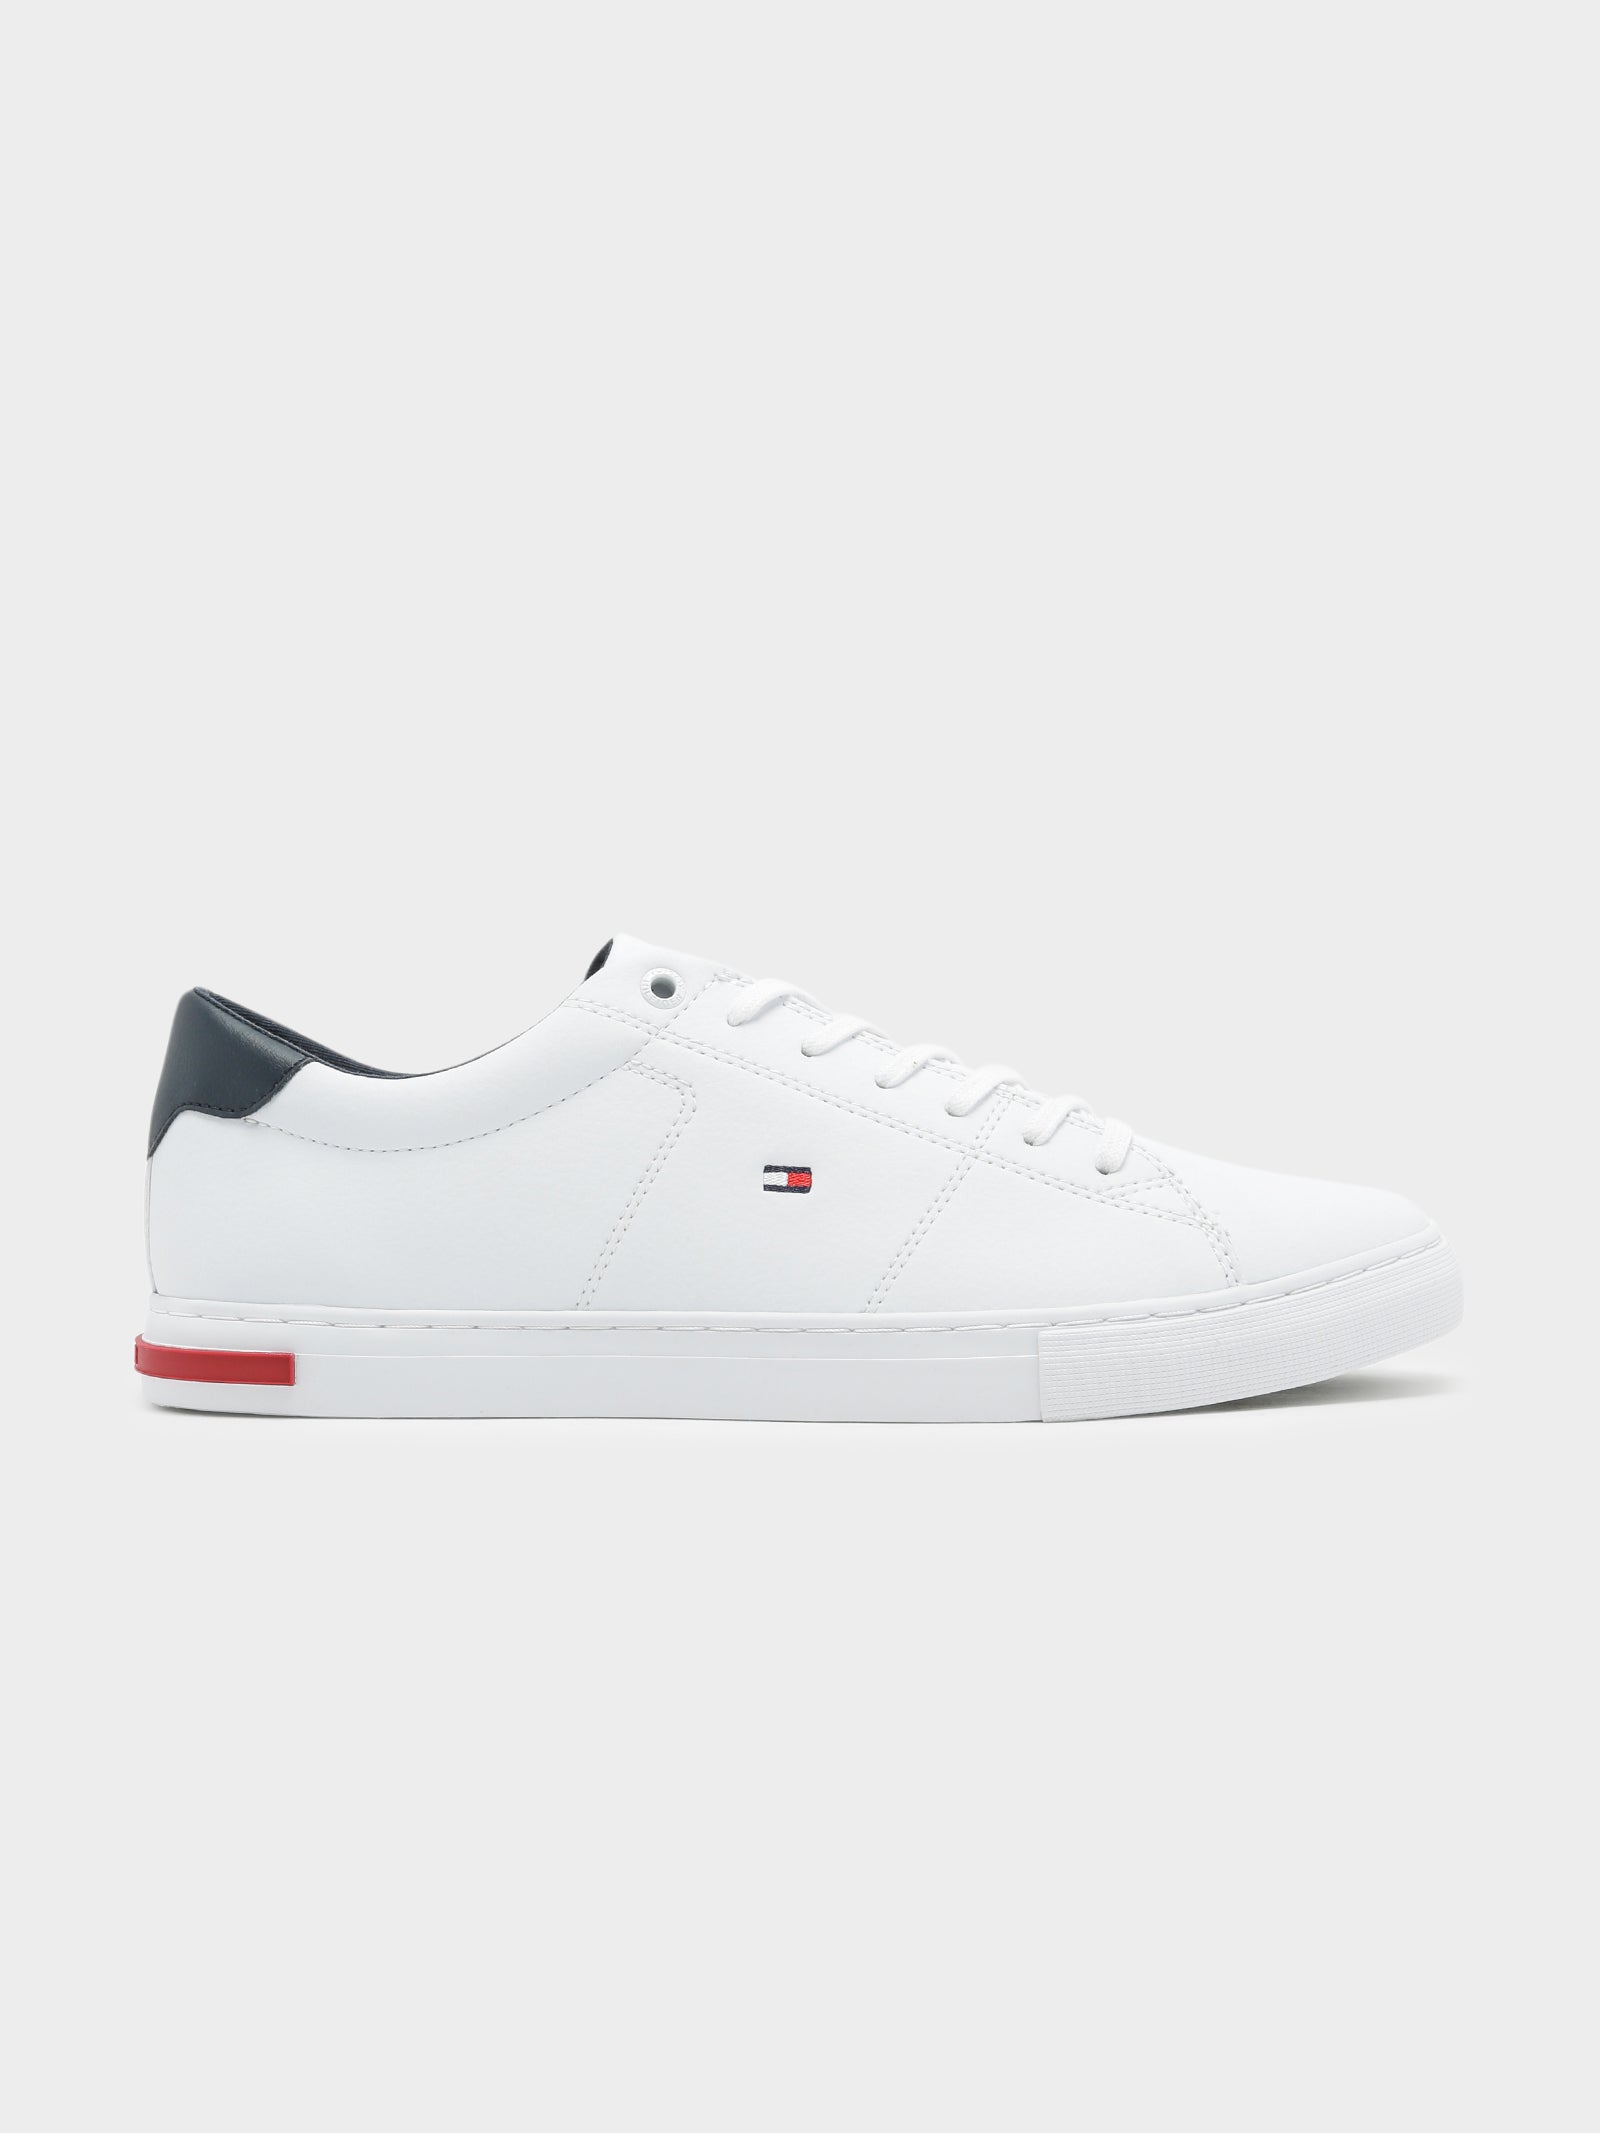 Mens Essential Leather Sneaker in White & Navy - Glue Store